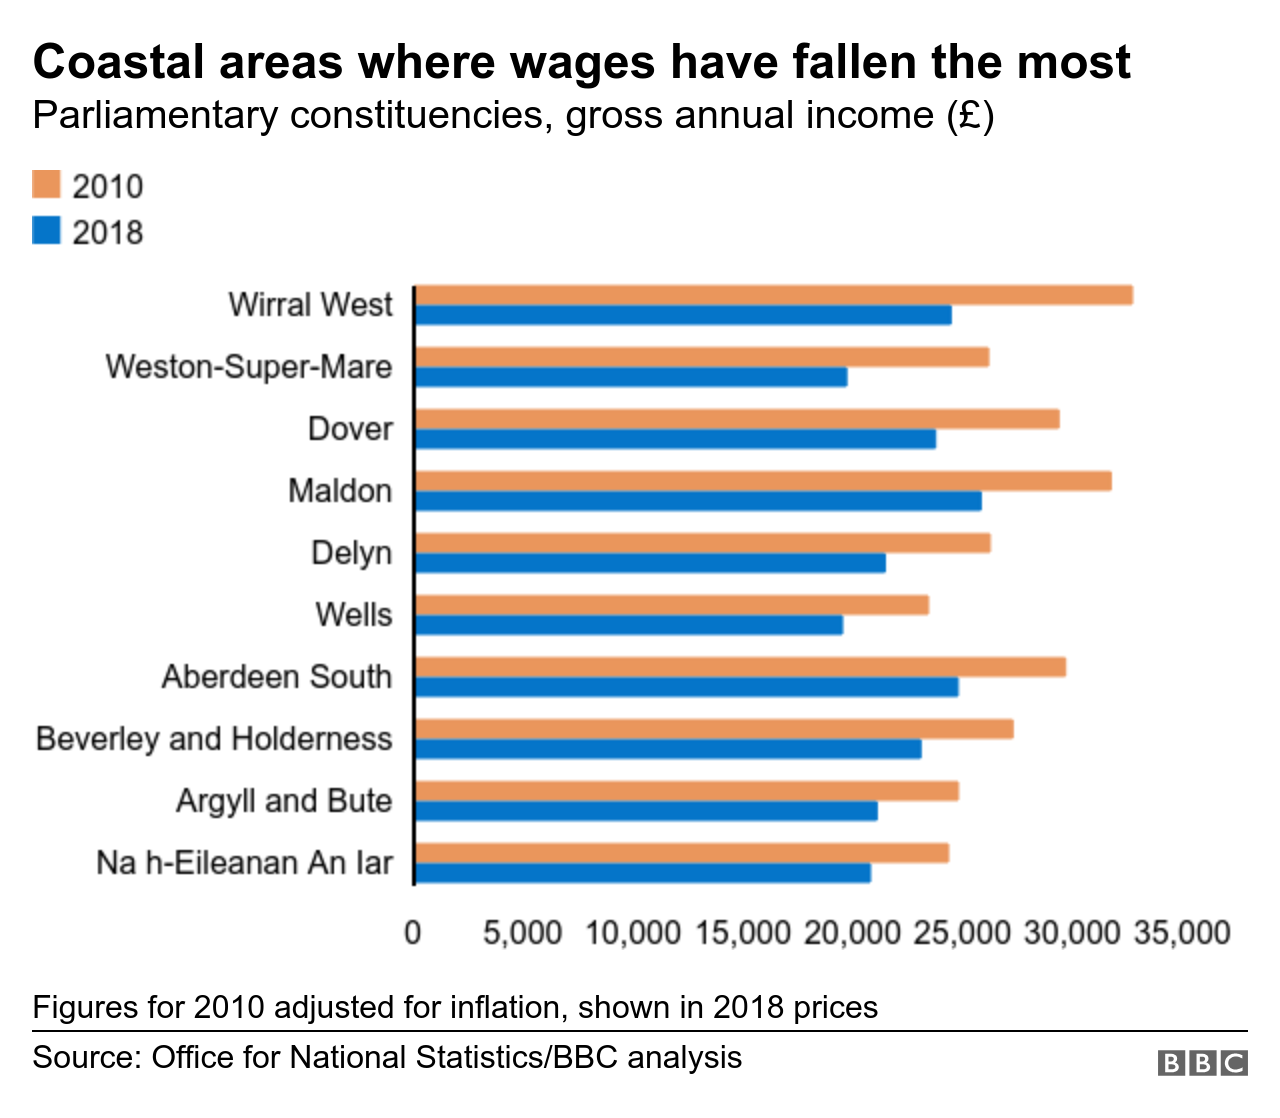 Chart showing coastal areas where wages have fallen the most